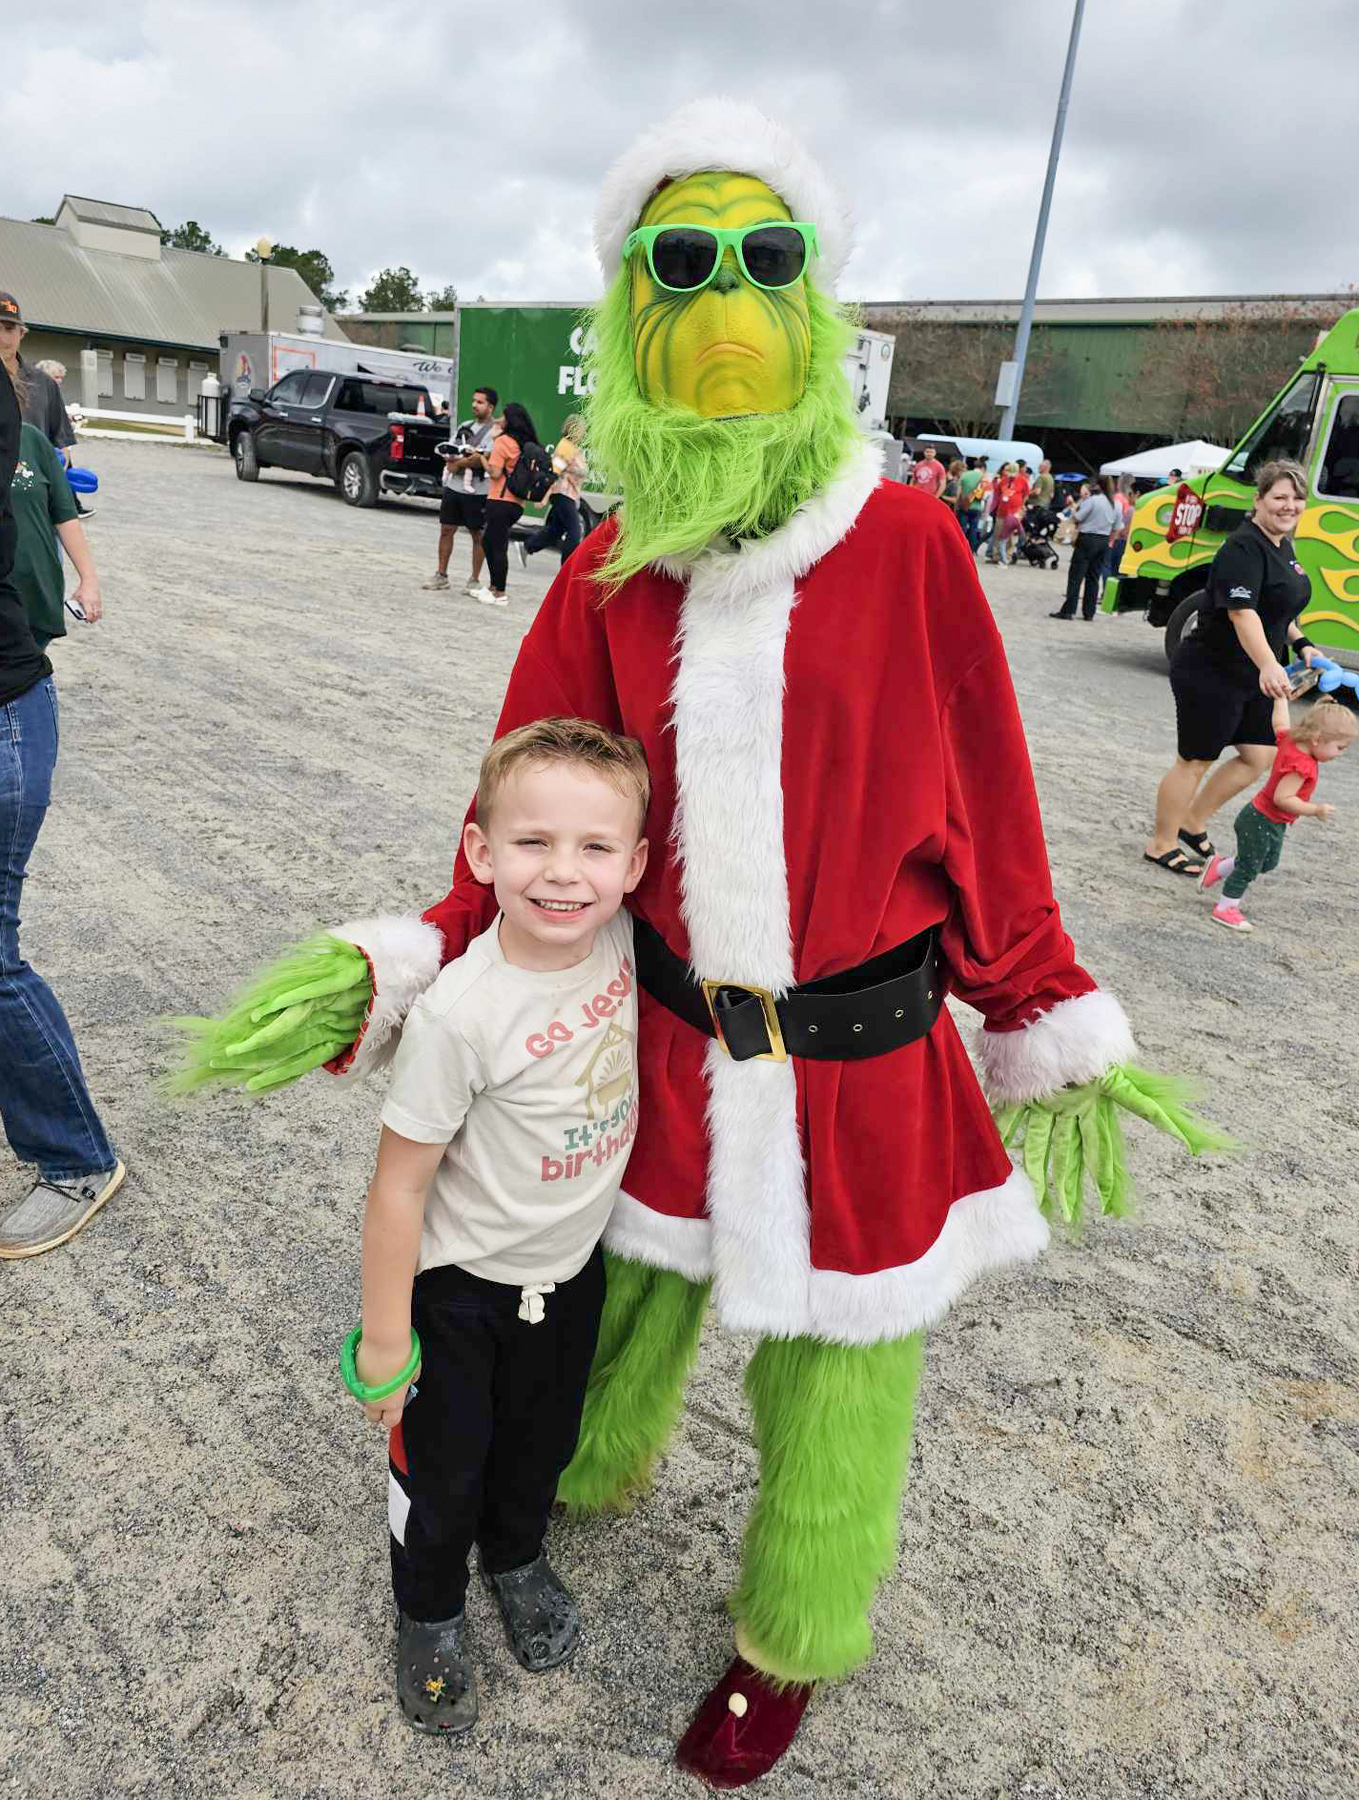 Crowds Attend Annual Beulah Bash (With Photo Gallery)